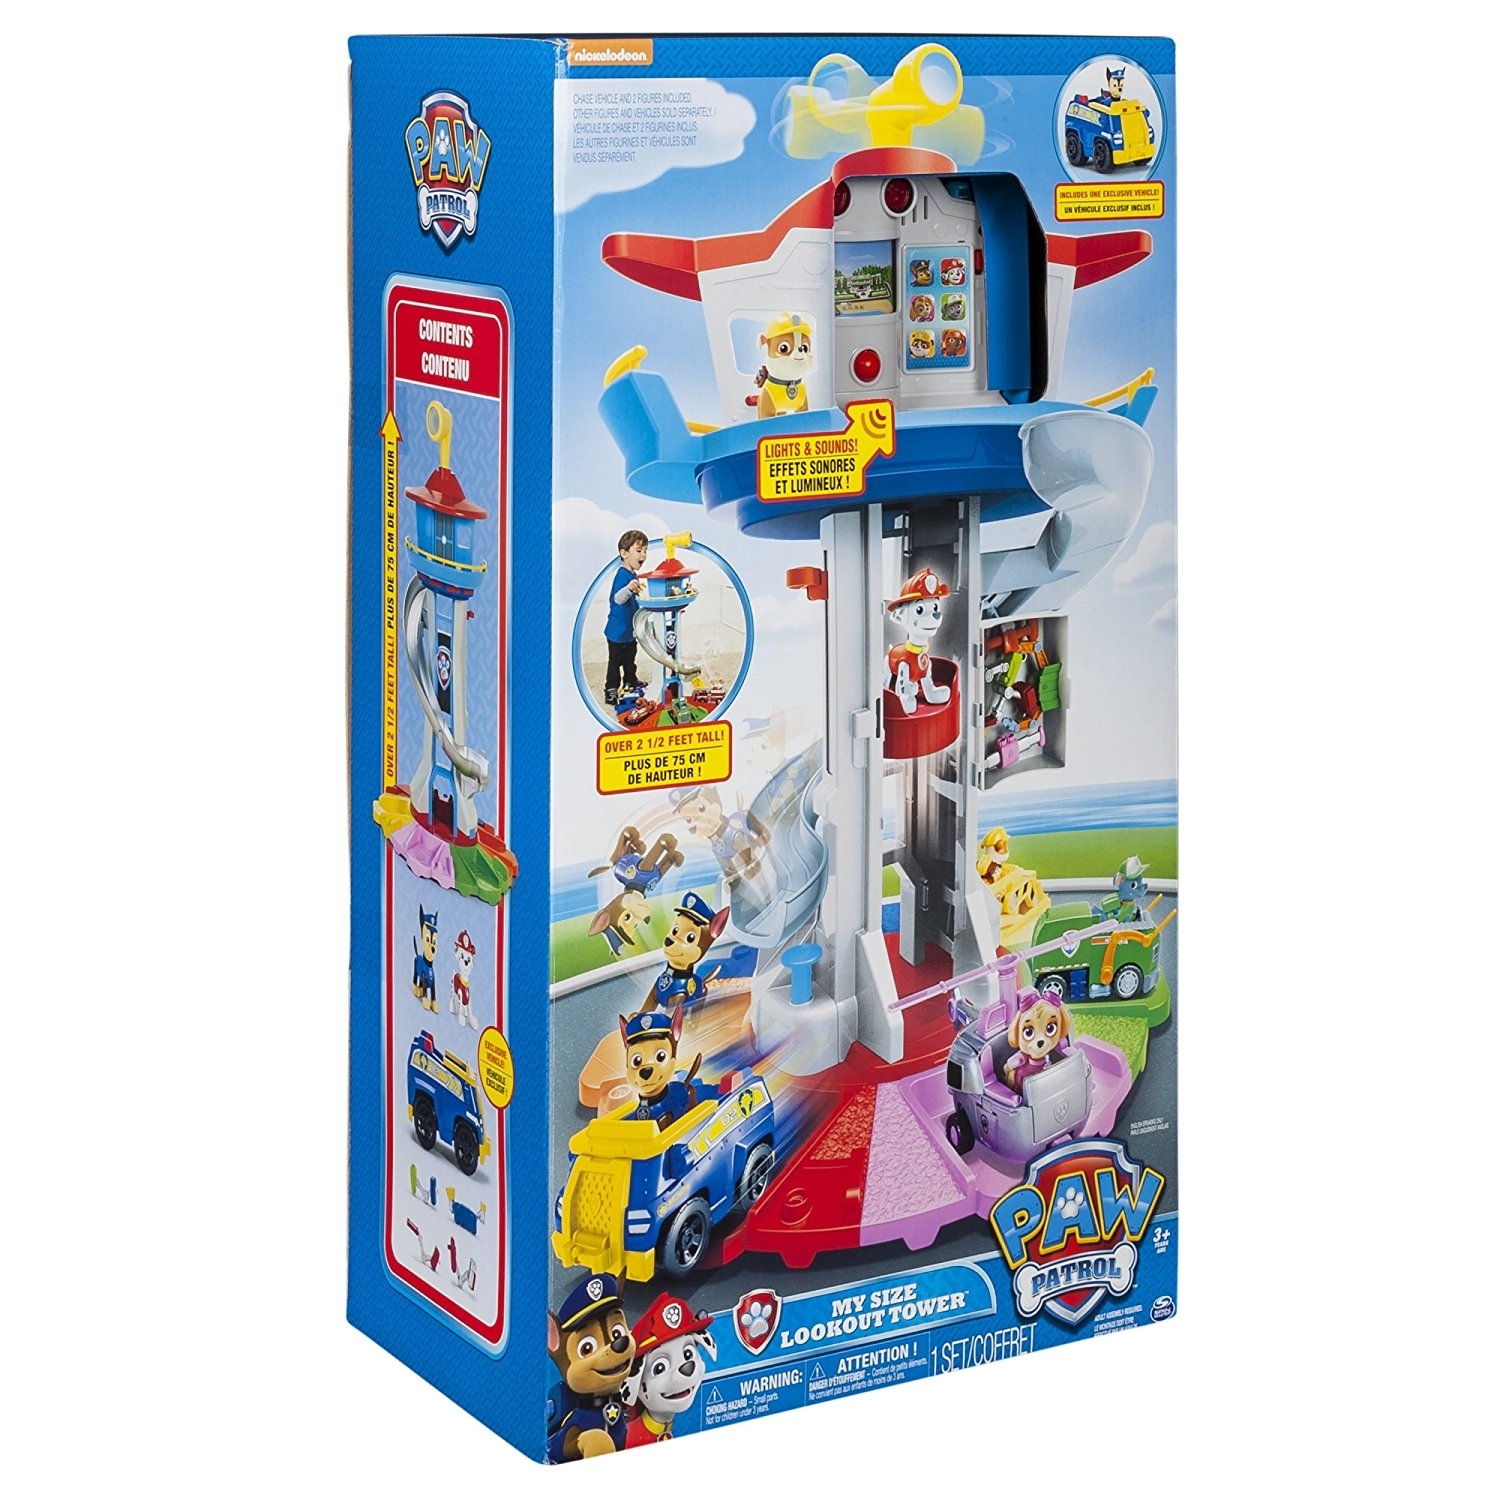 Paw Patrol My Size Lookout Tower Spin Master